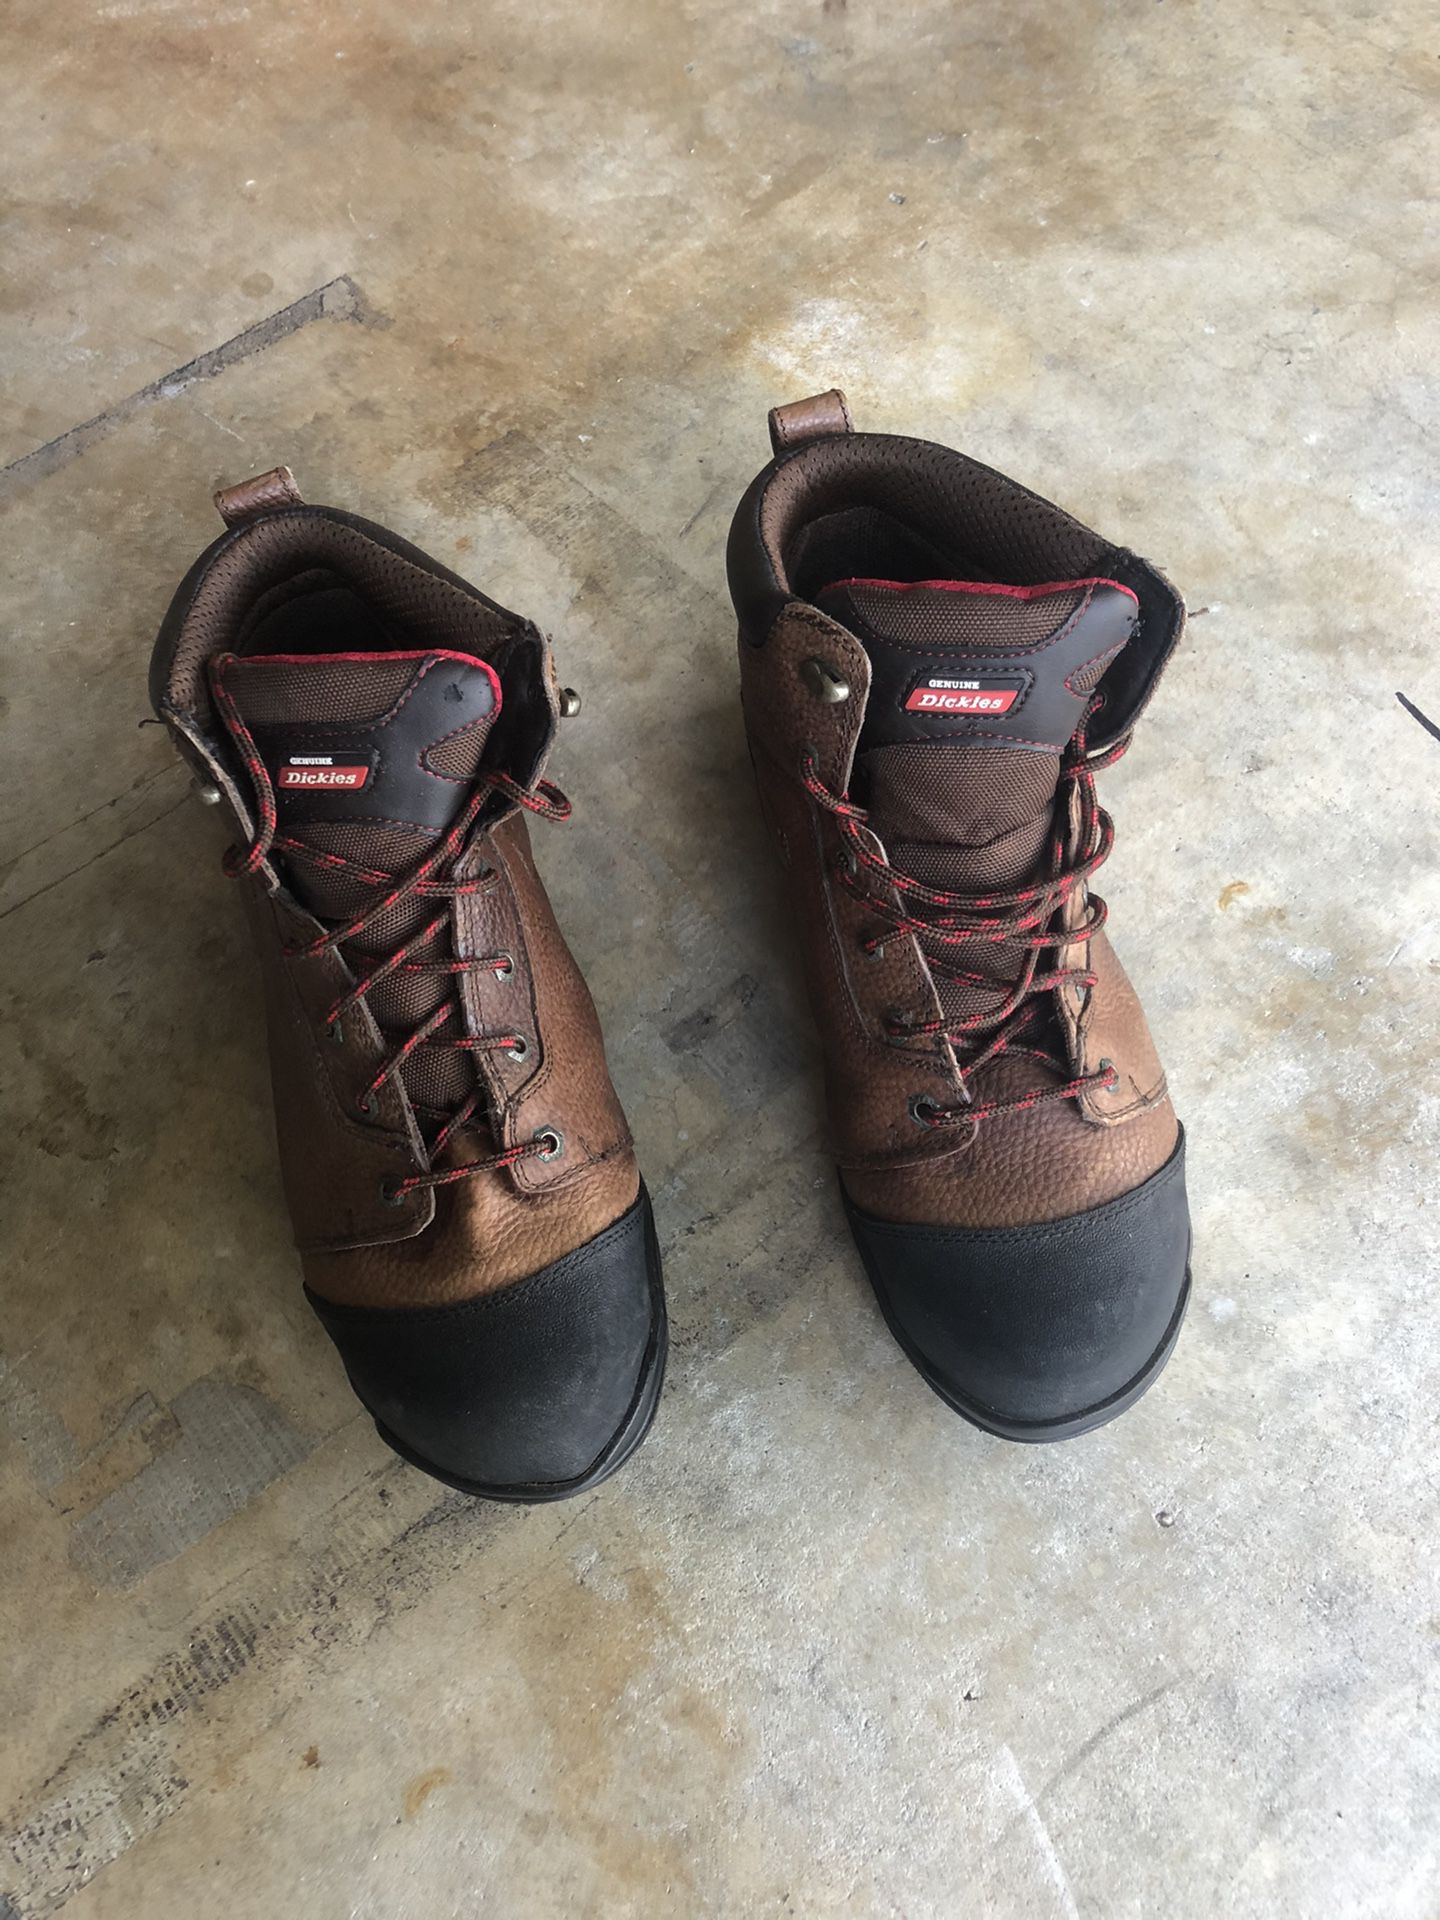 Dickies Work Boots. Steel toe. Size 14